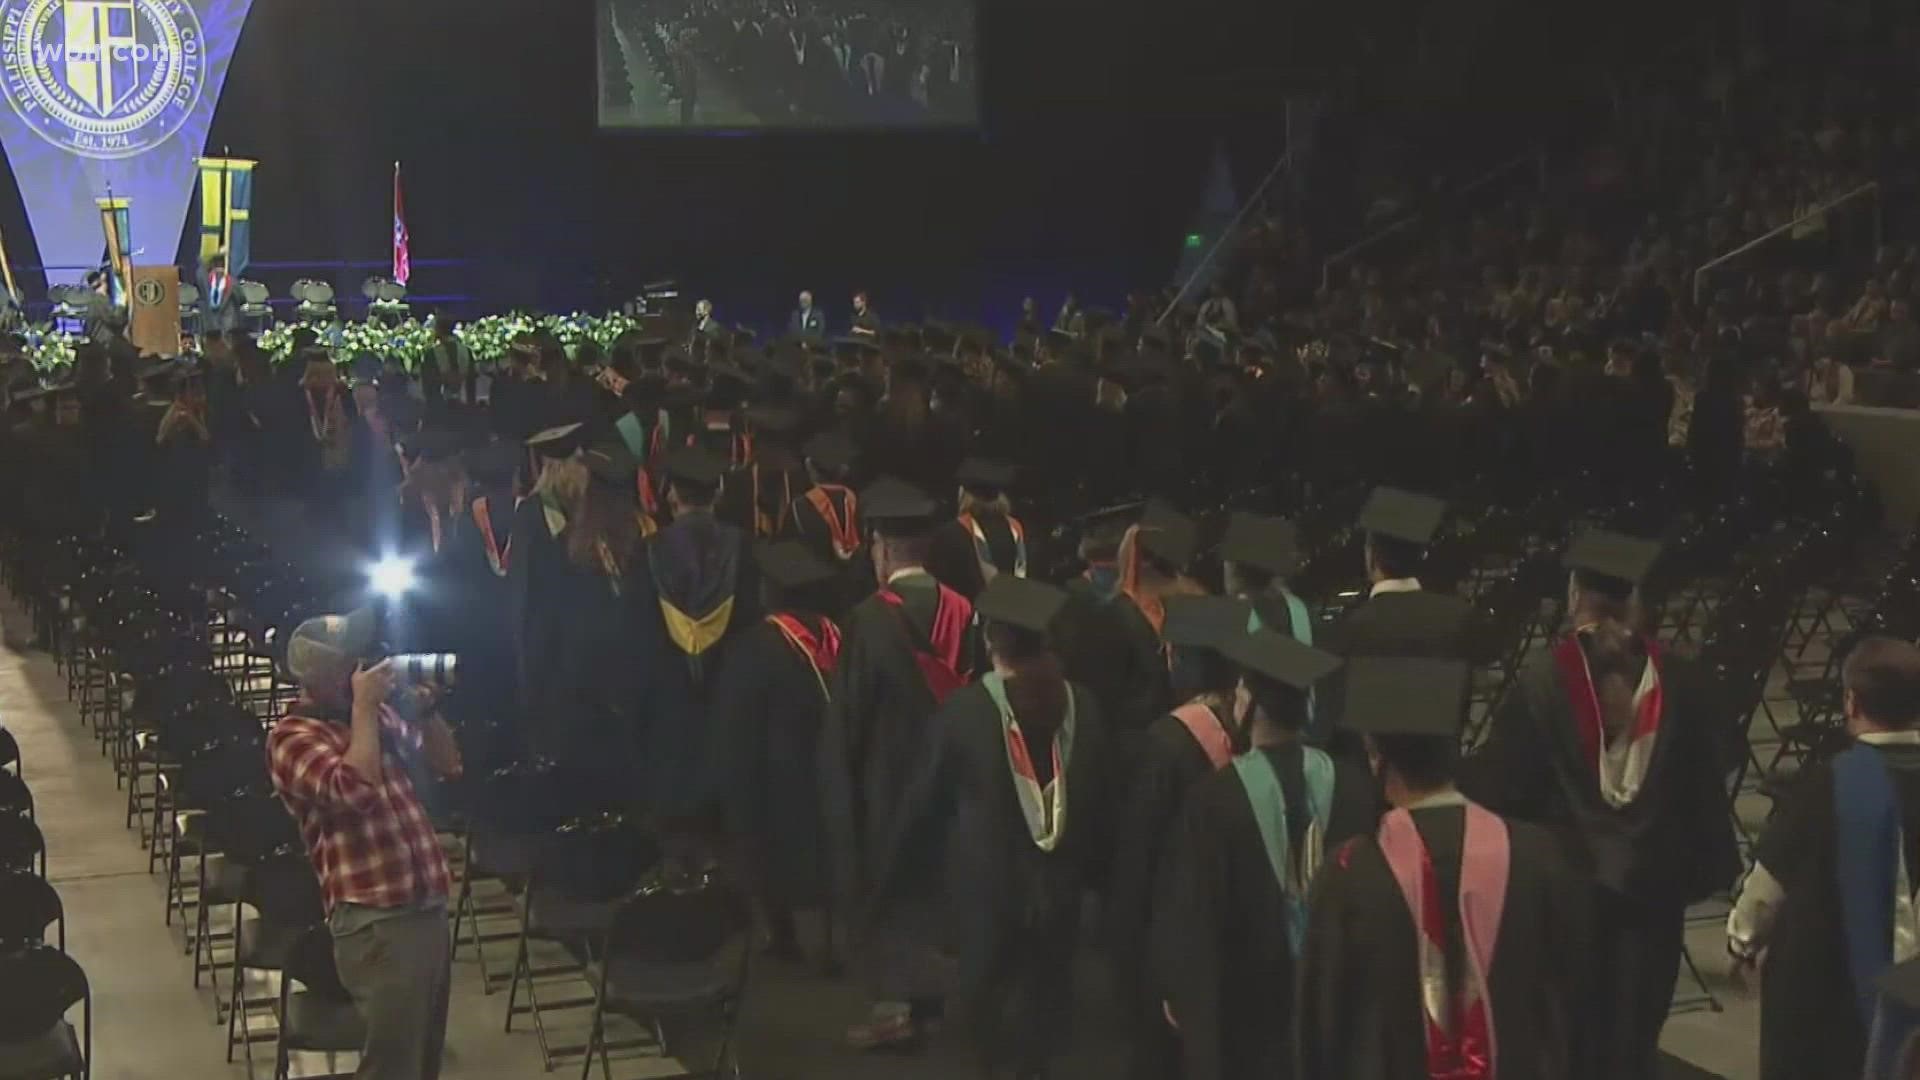 Graduates from Pellissippi State are celebrating Friday night, finally getting their degrees after months of work and a ransomware attack.